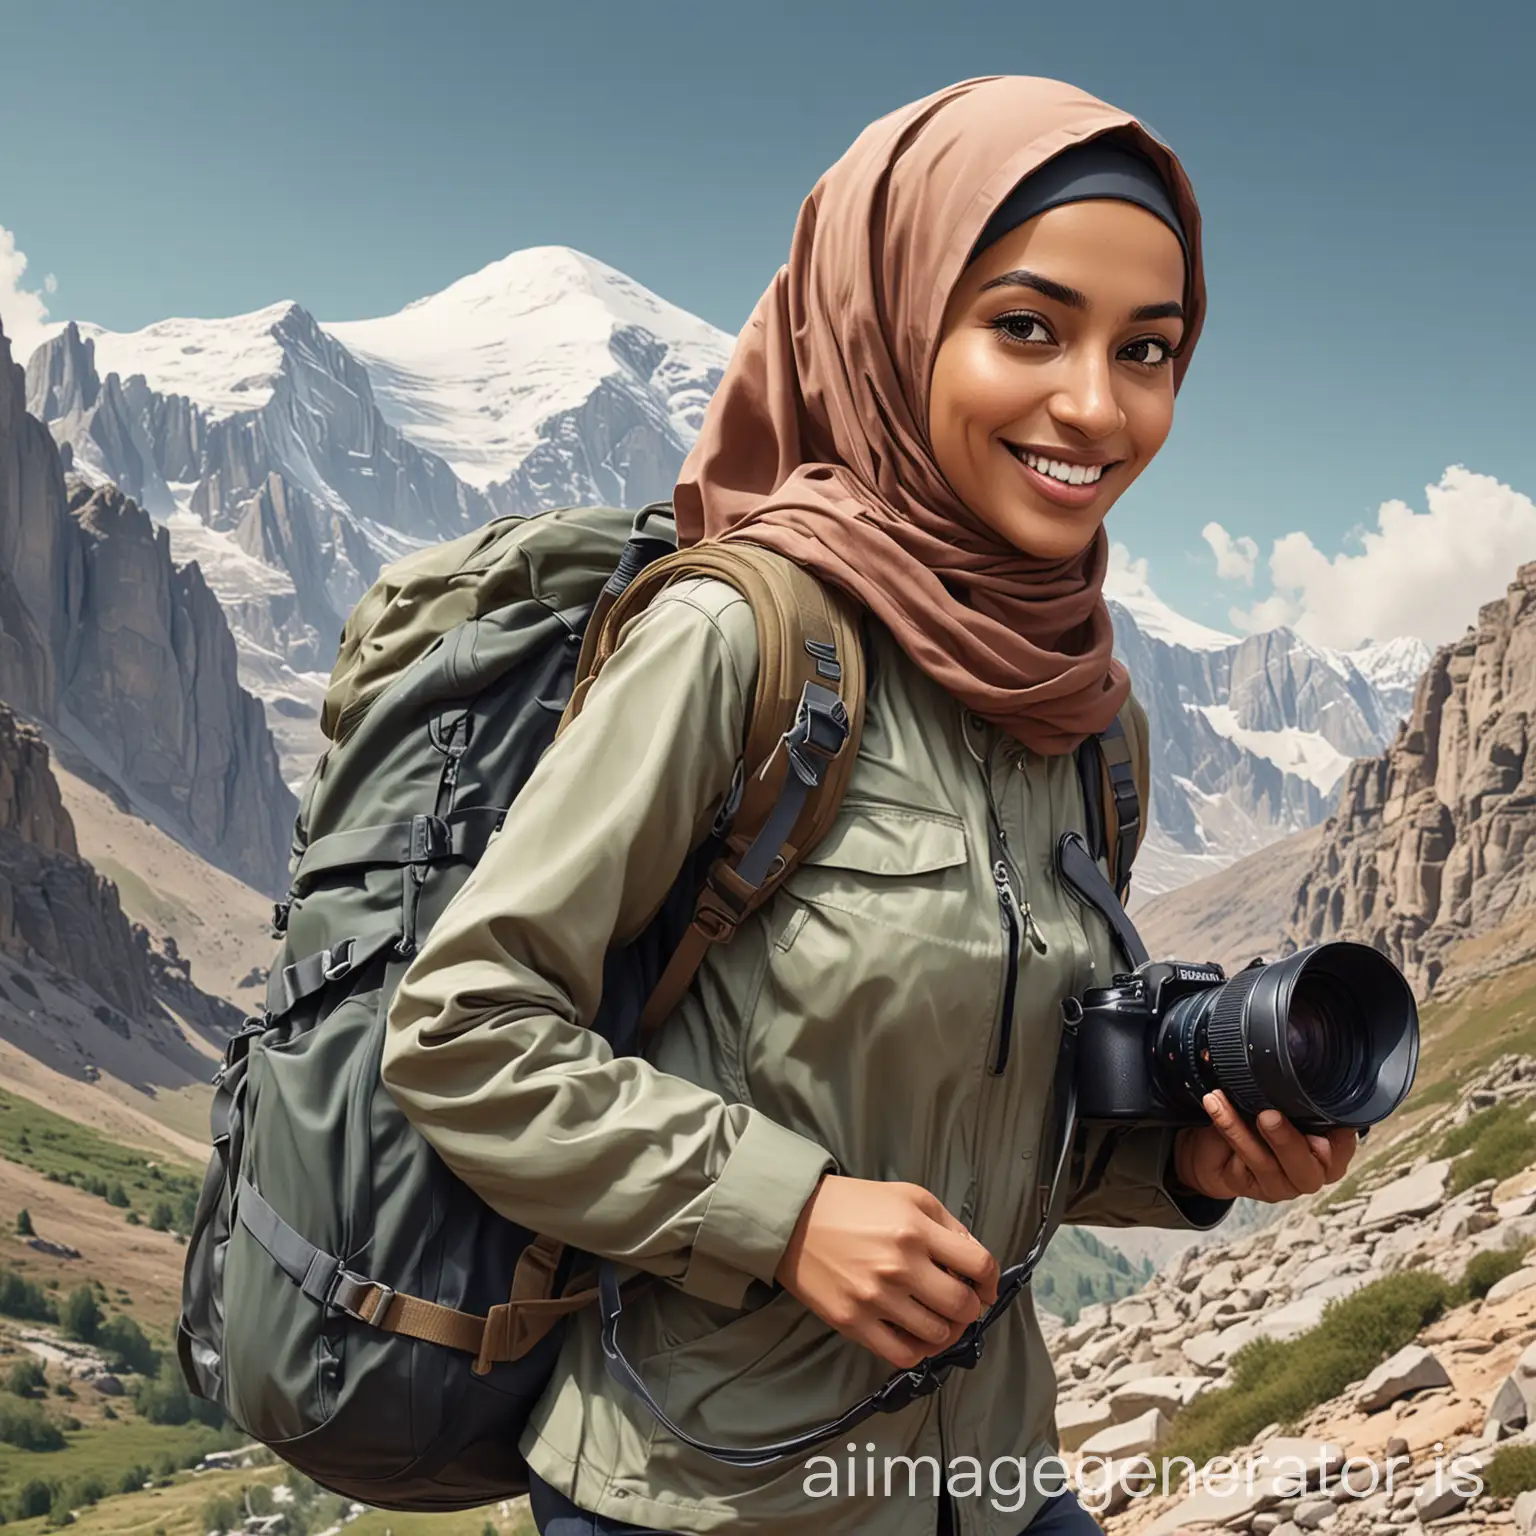 Make an AI caricature of a Muslim woman hiker carrying a mountain bag and a camera